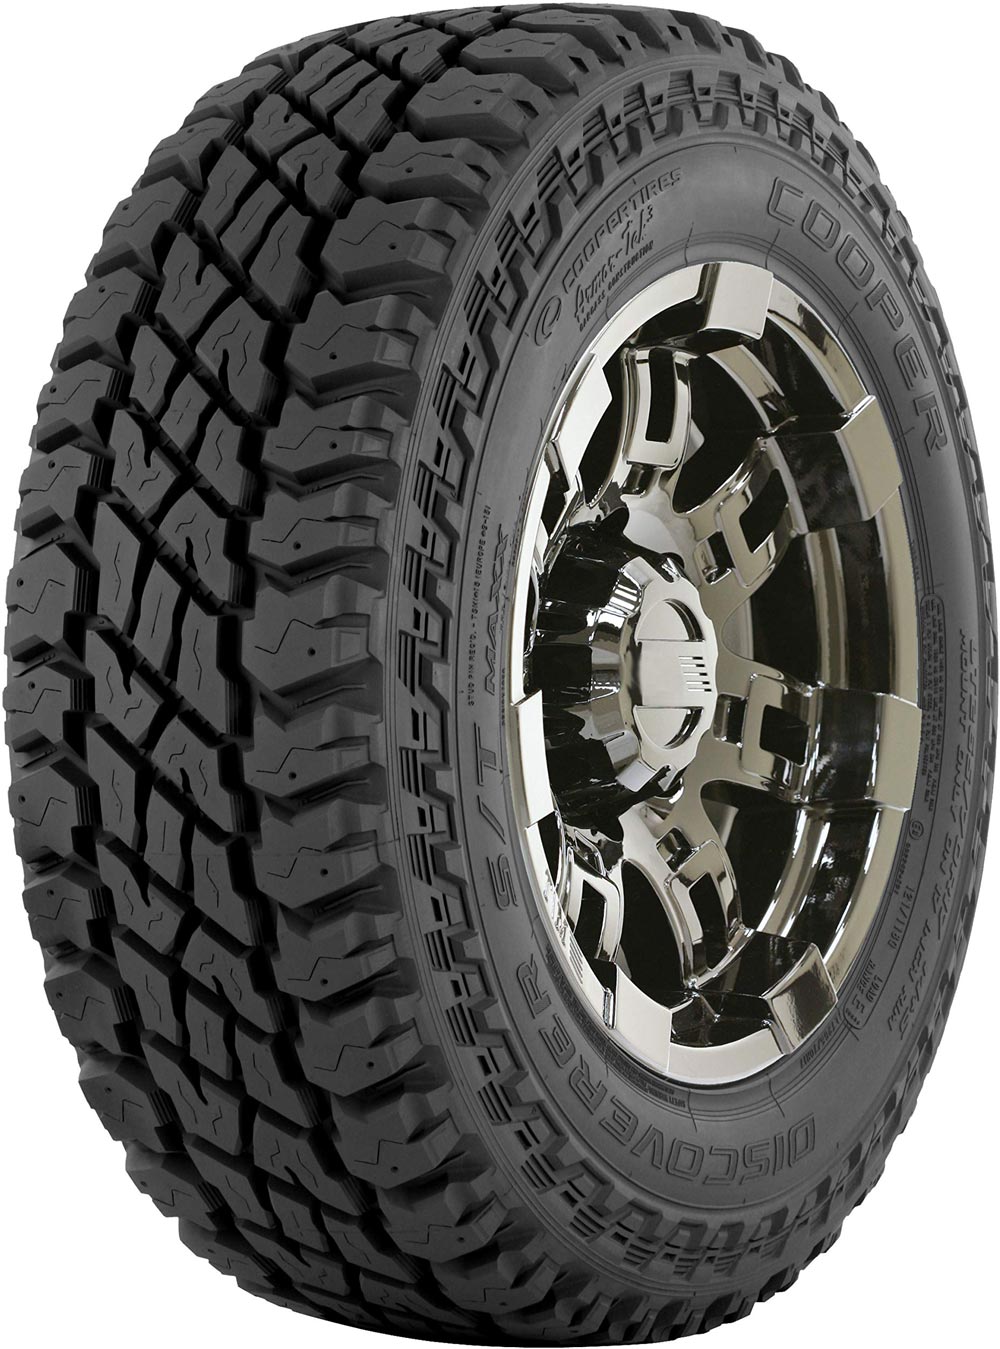 COOPER DISCOVERER ST MAXX P O BSW 265/65 R17 120Q